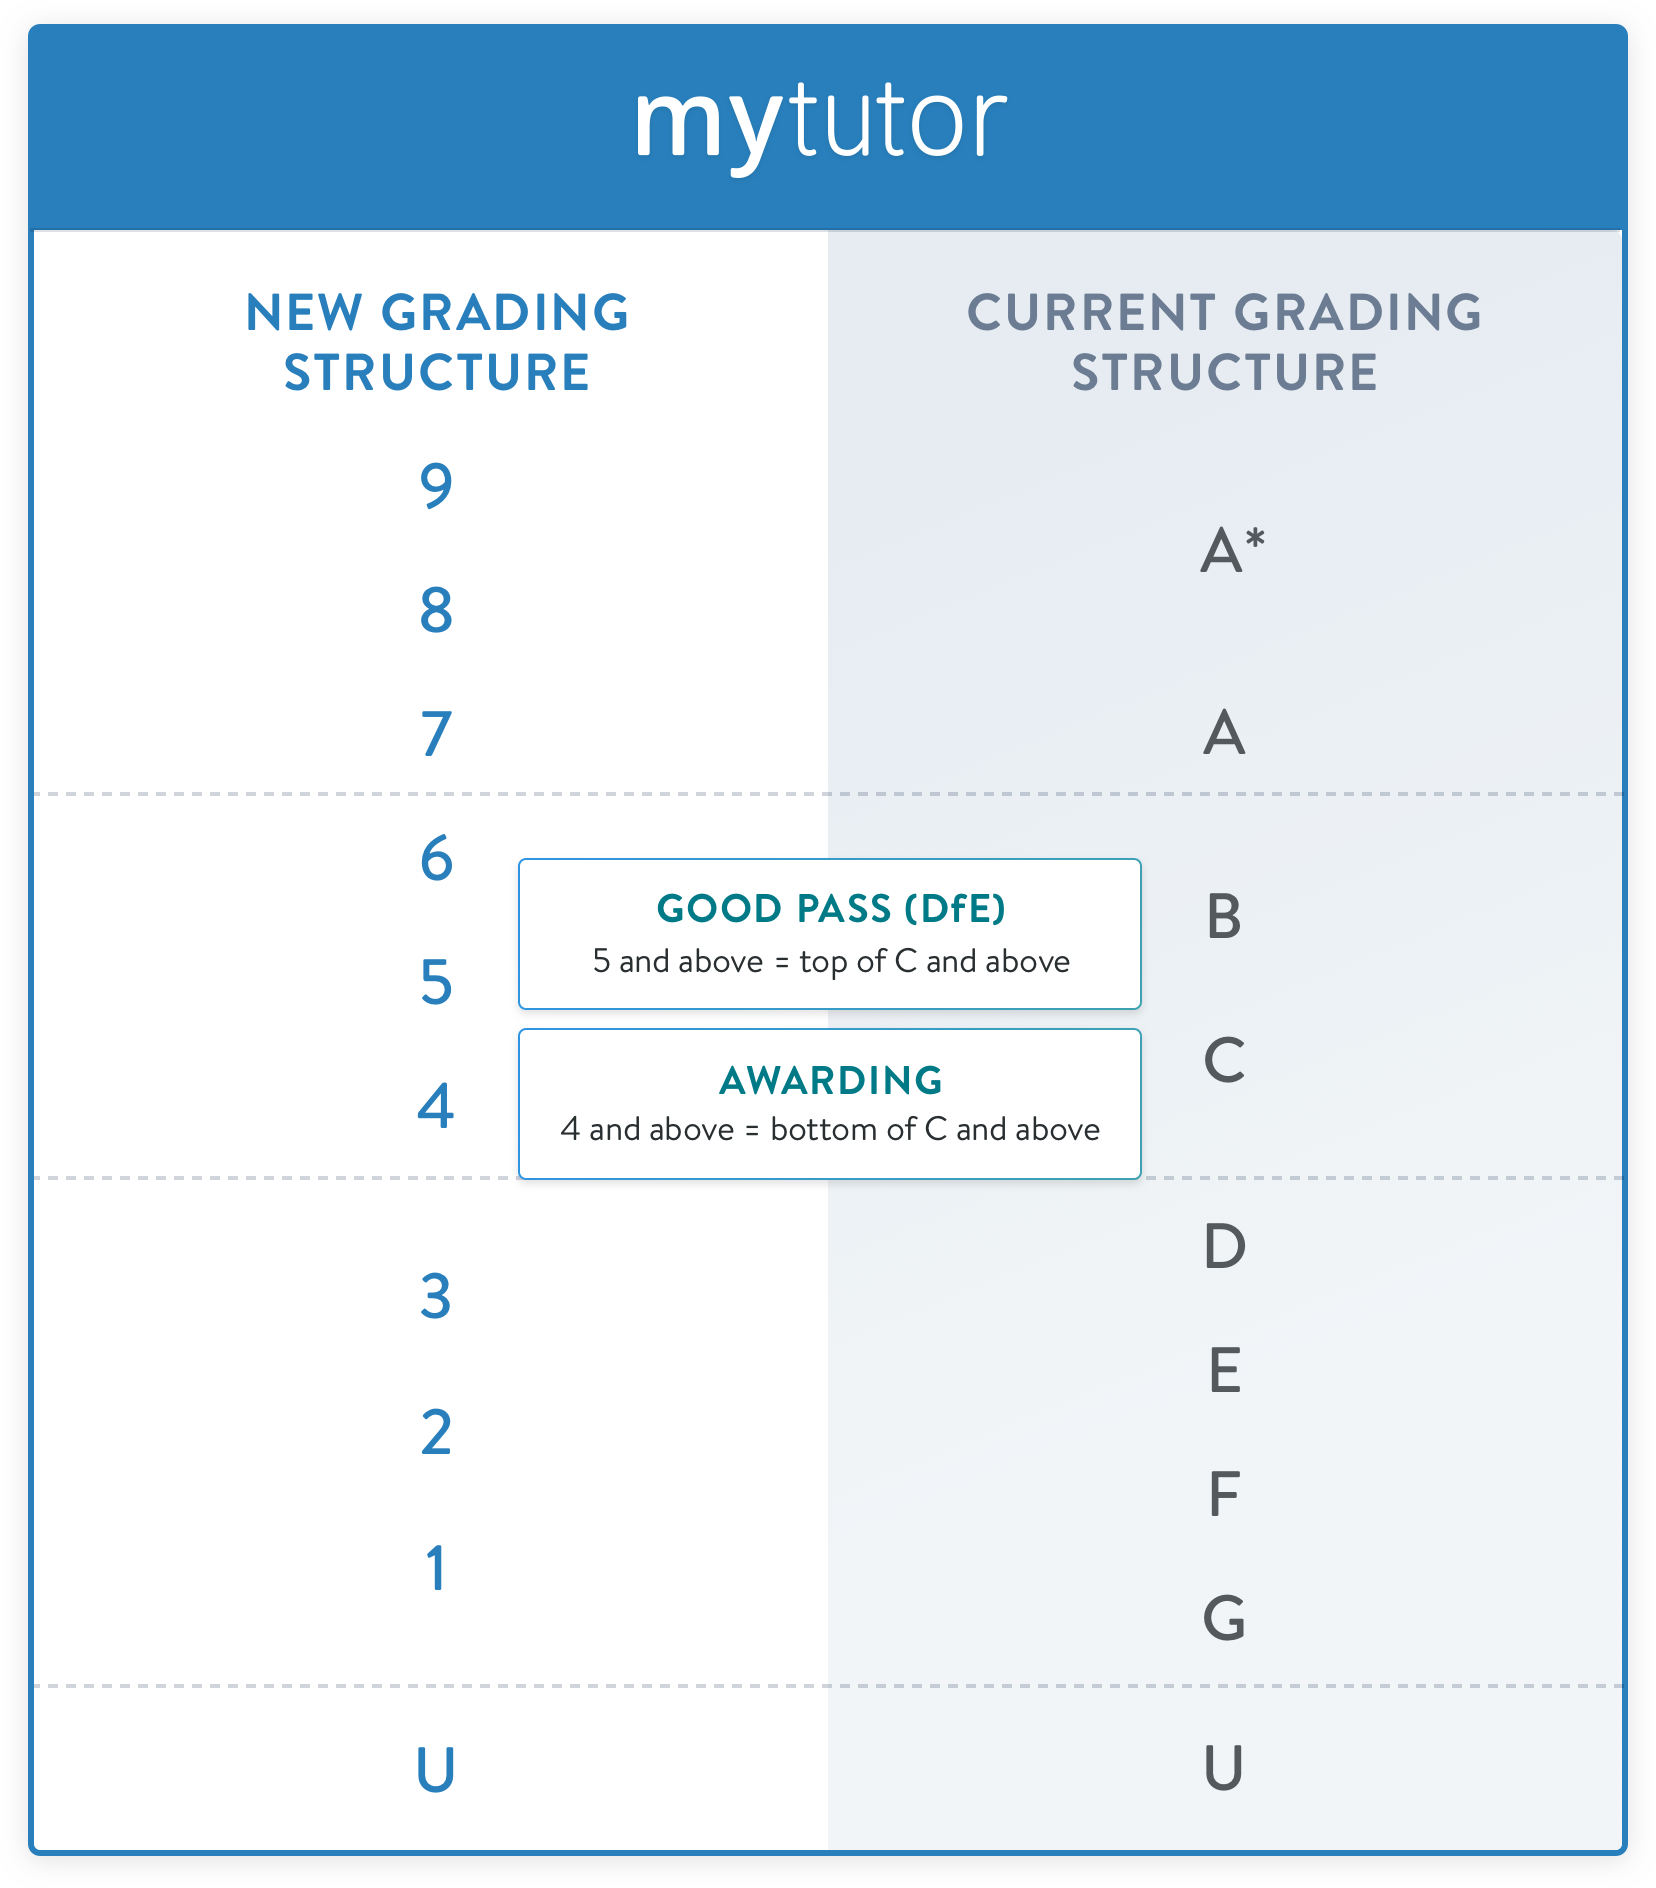 How to Know Your Child's GCSE Grade (and Understand the GCSE Grading  System) - GCSE Grading System